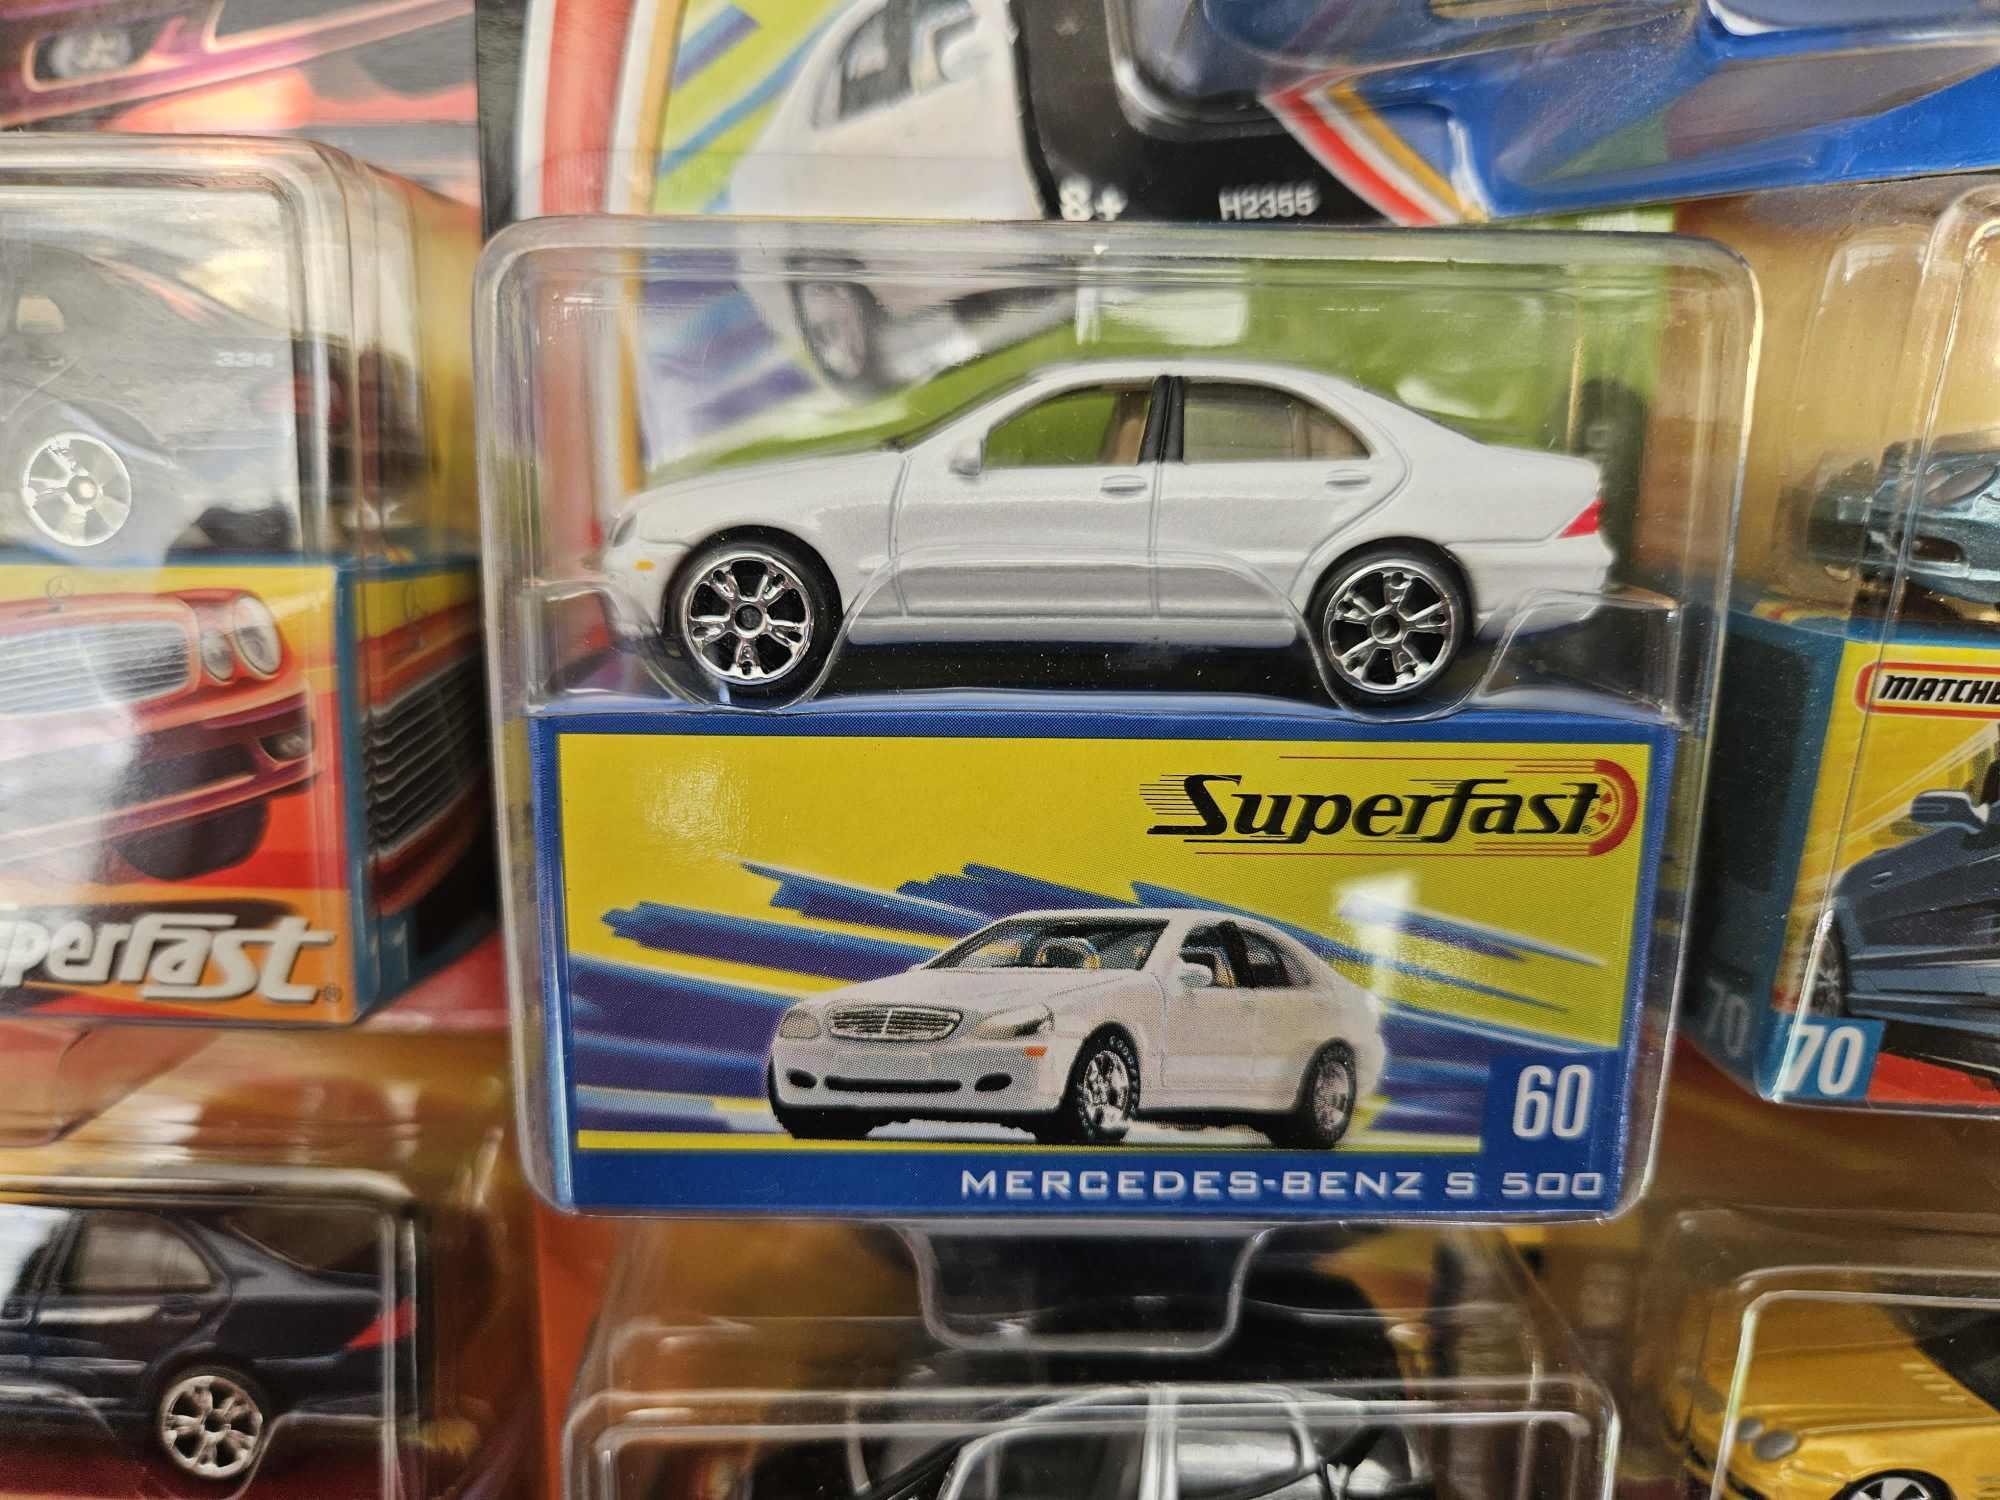 9 MATCHBOX SUPERFAST IN BLISTERPACKS WITH BOX